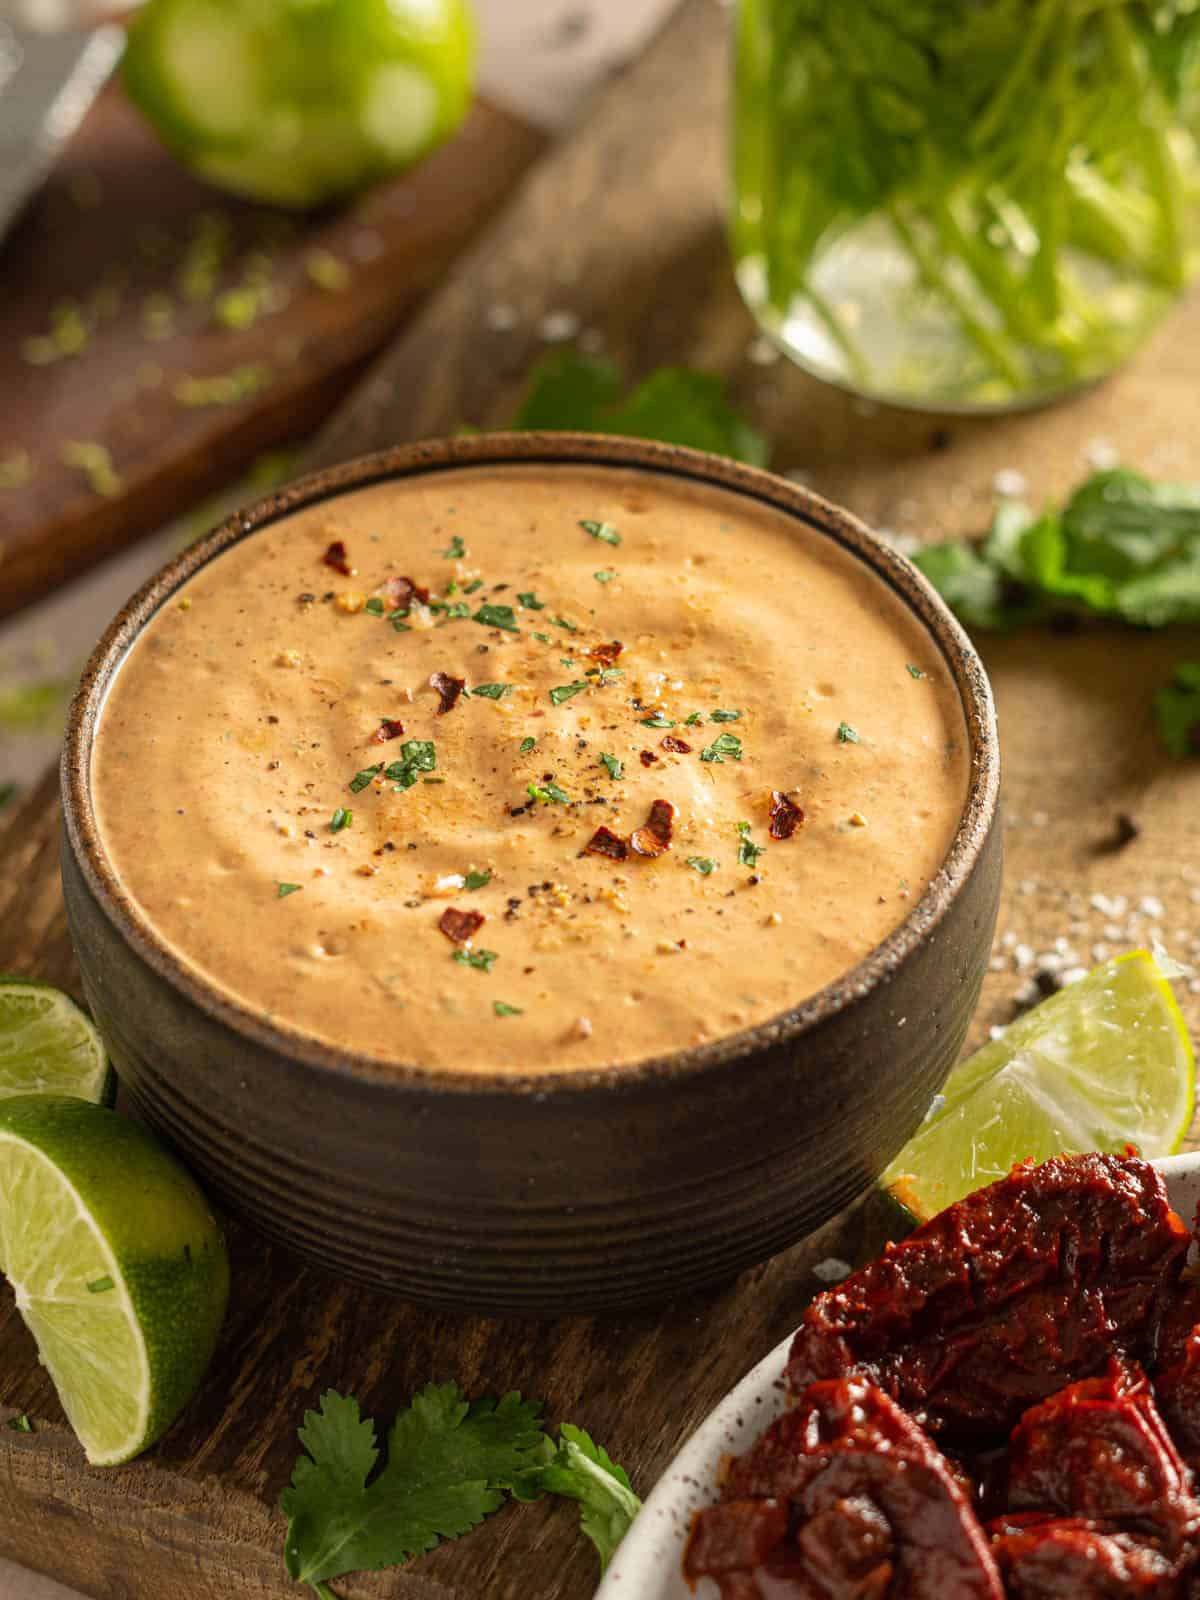 Chipotle lime sauce with red pepper flakes and chipotle peppers.